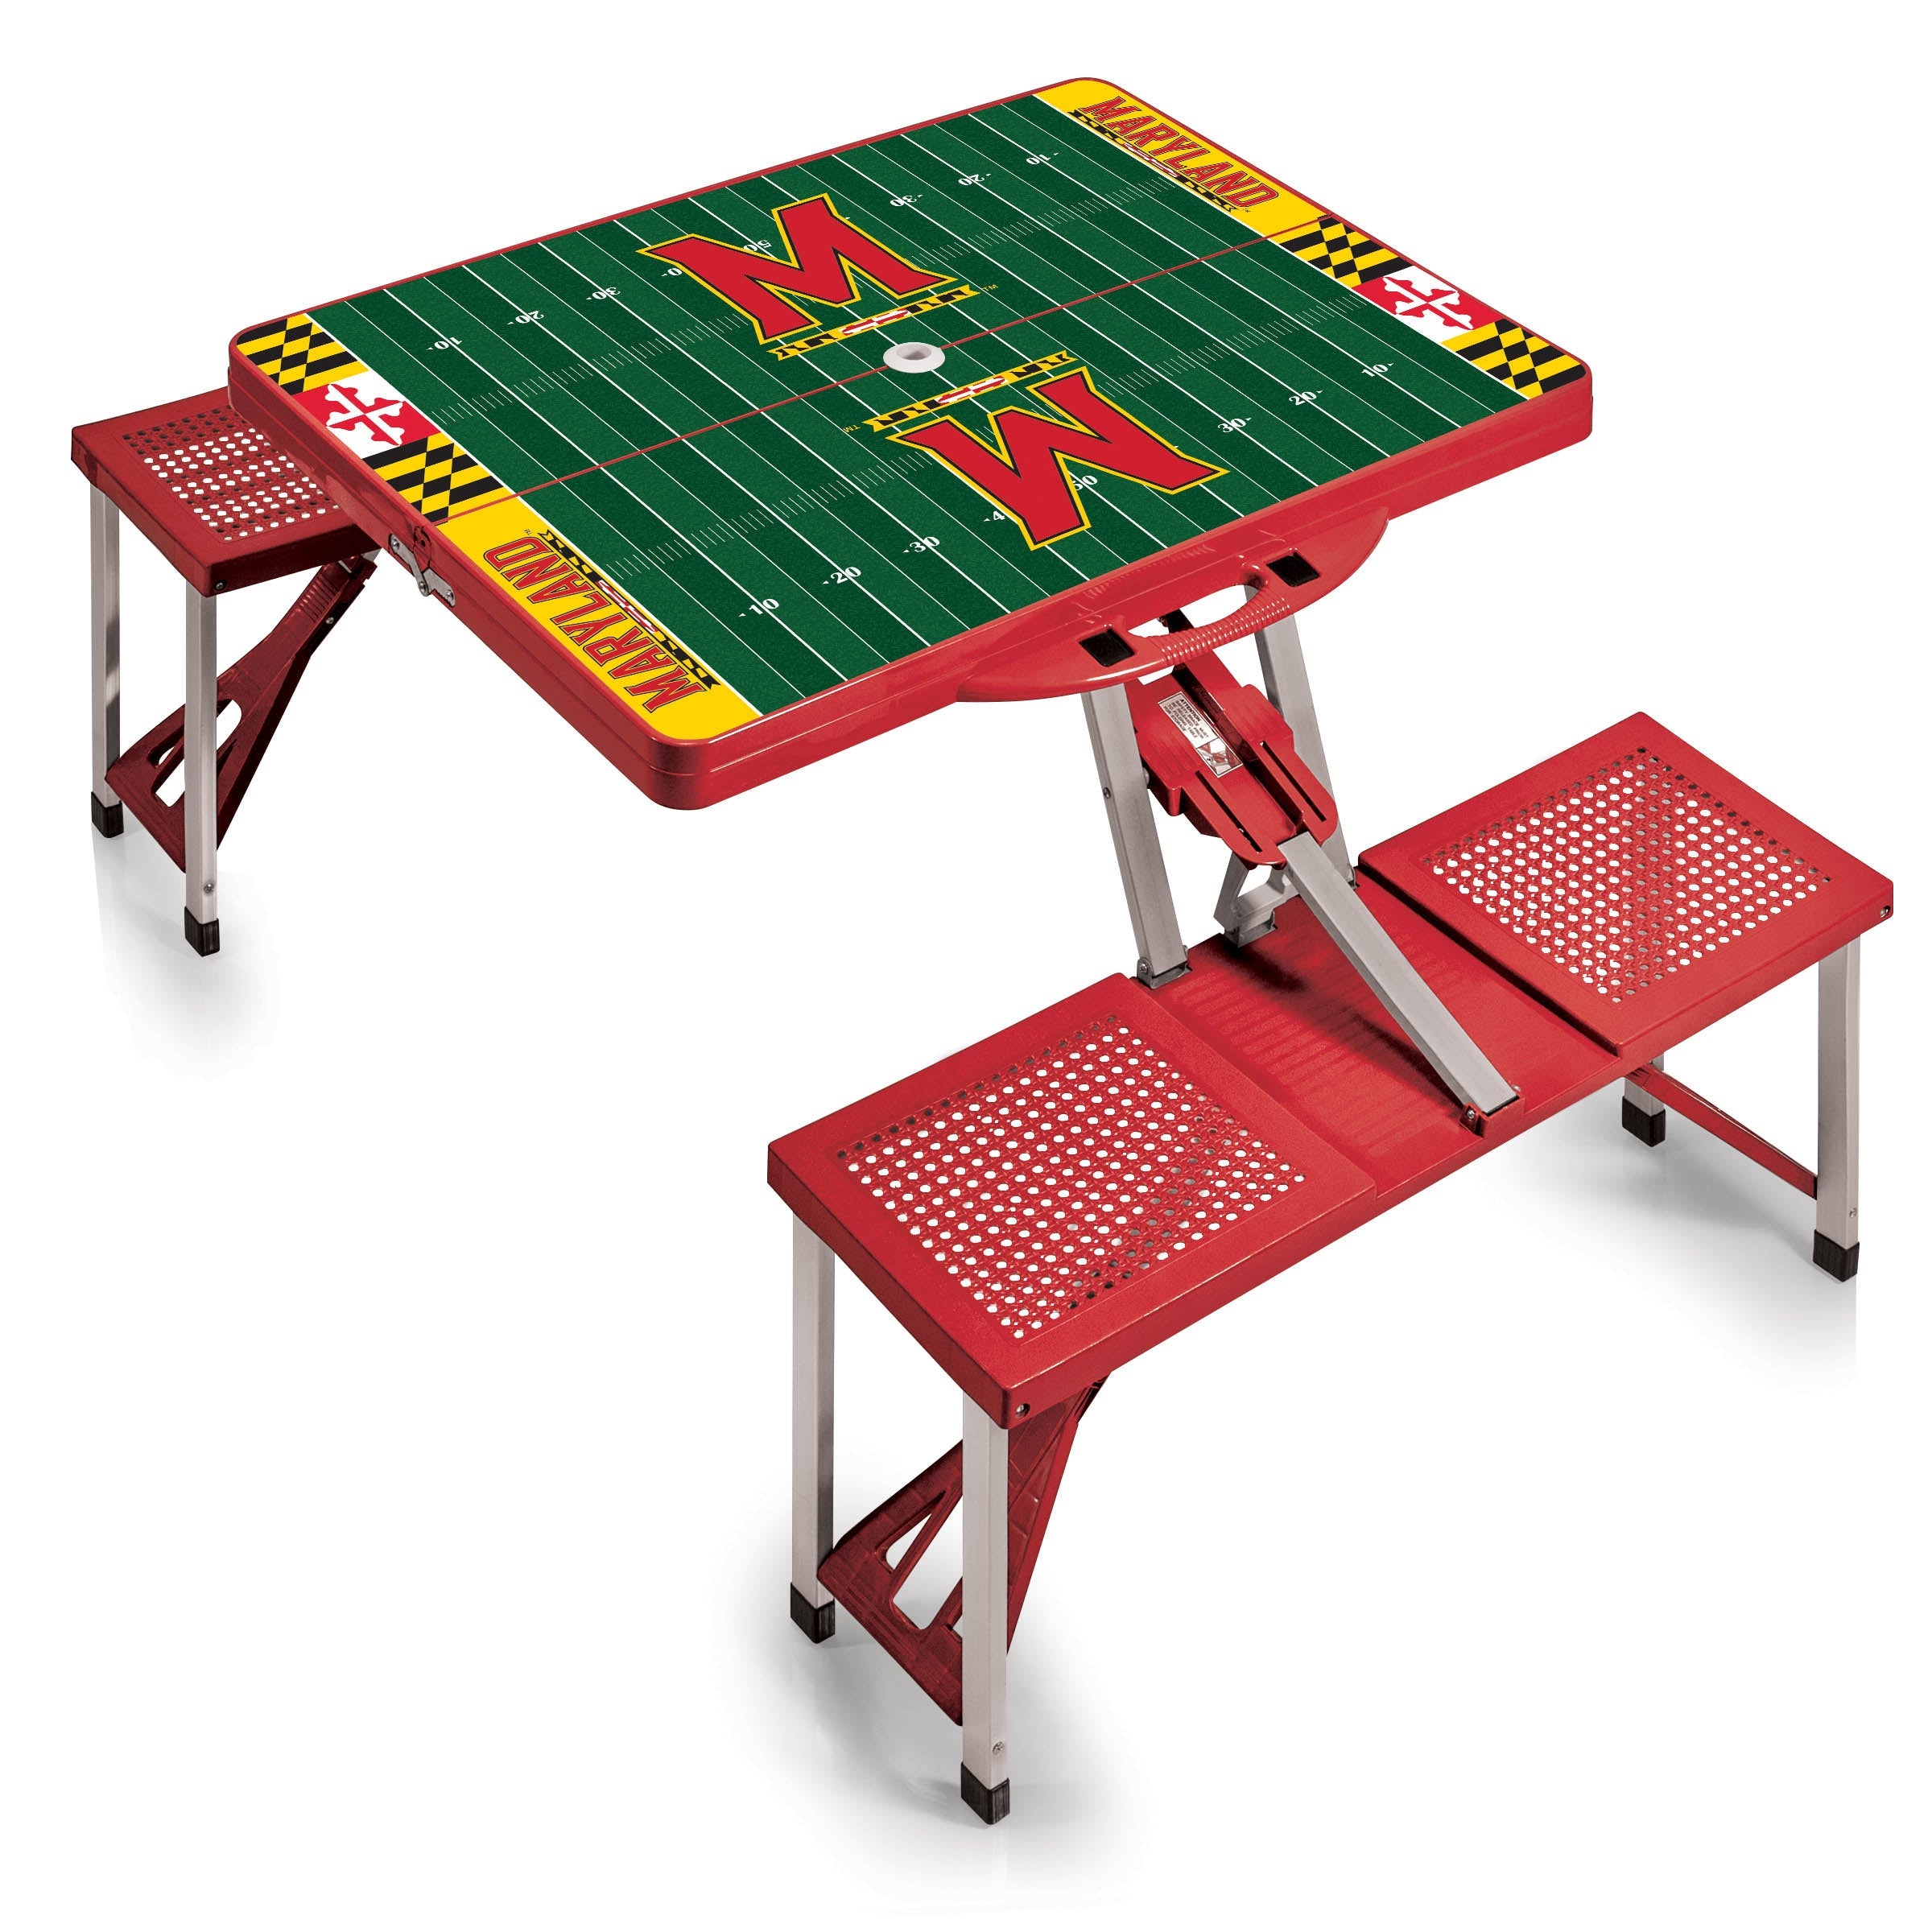 Football Field - Maryland Terrapins - Picnic Table Portable Folding Table with Seats